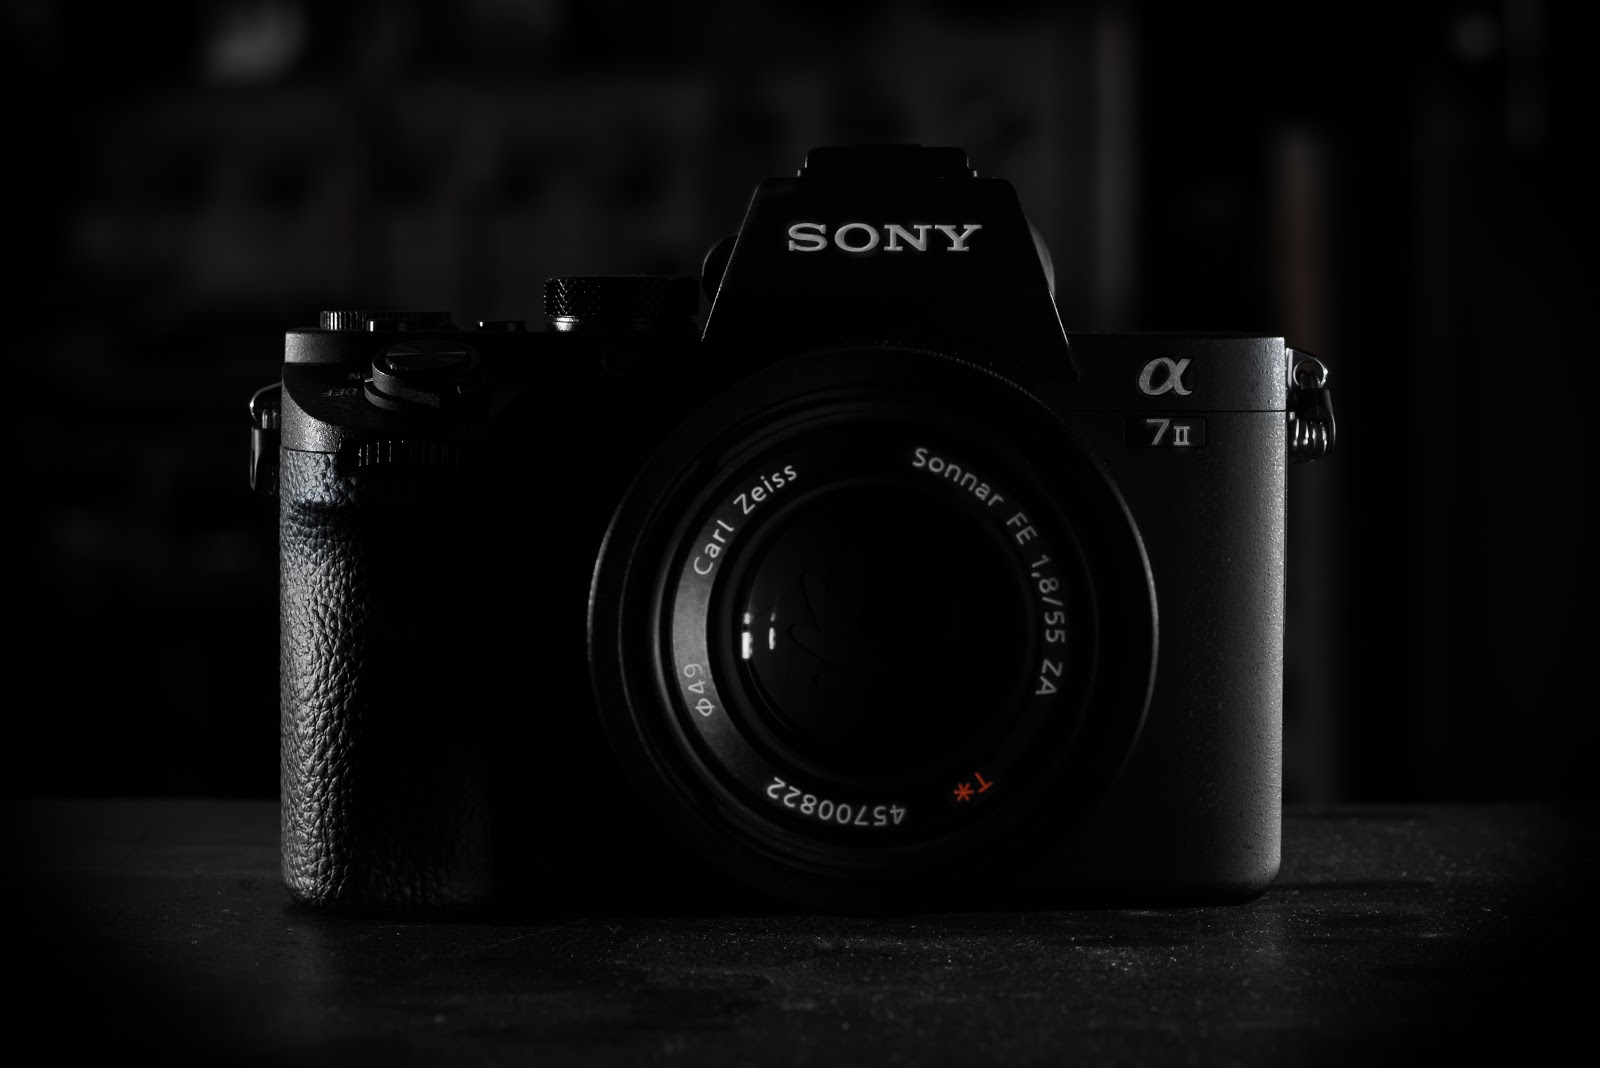 Henry's Note: Sony Alpha 7 II - Review